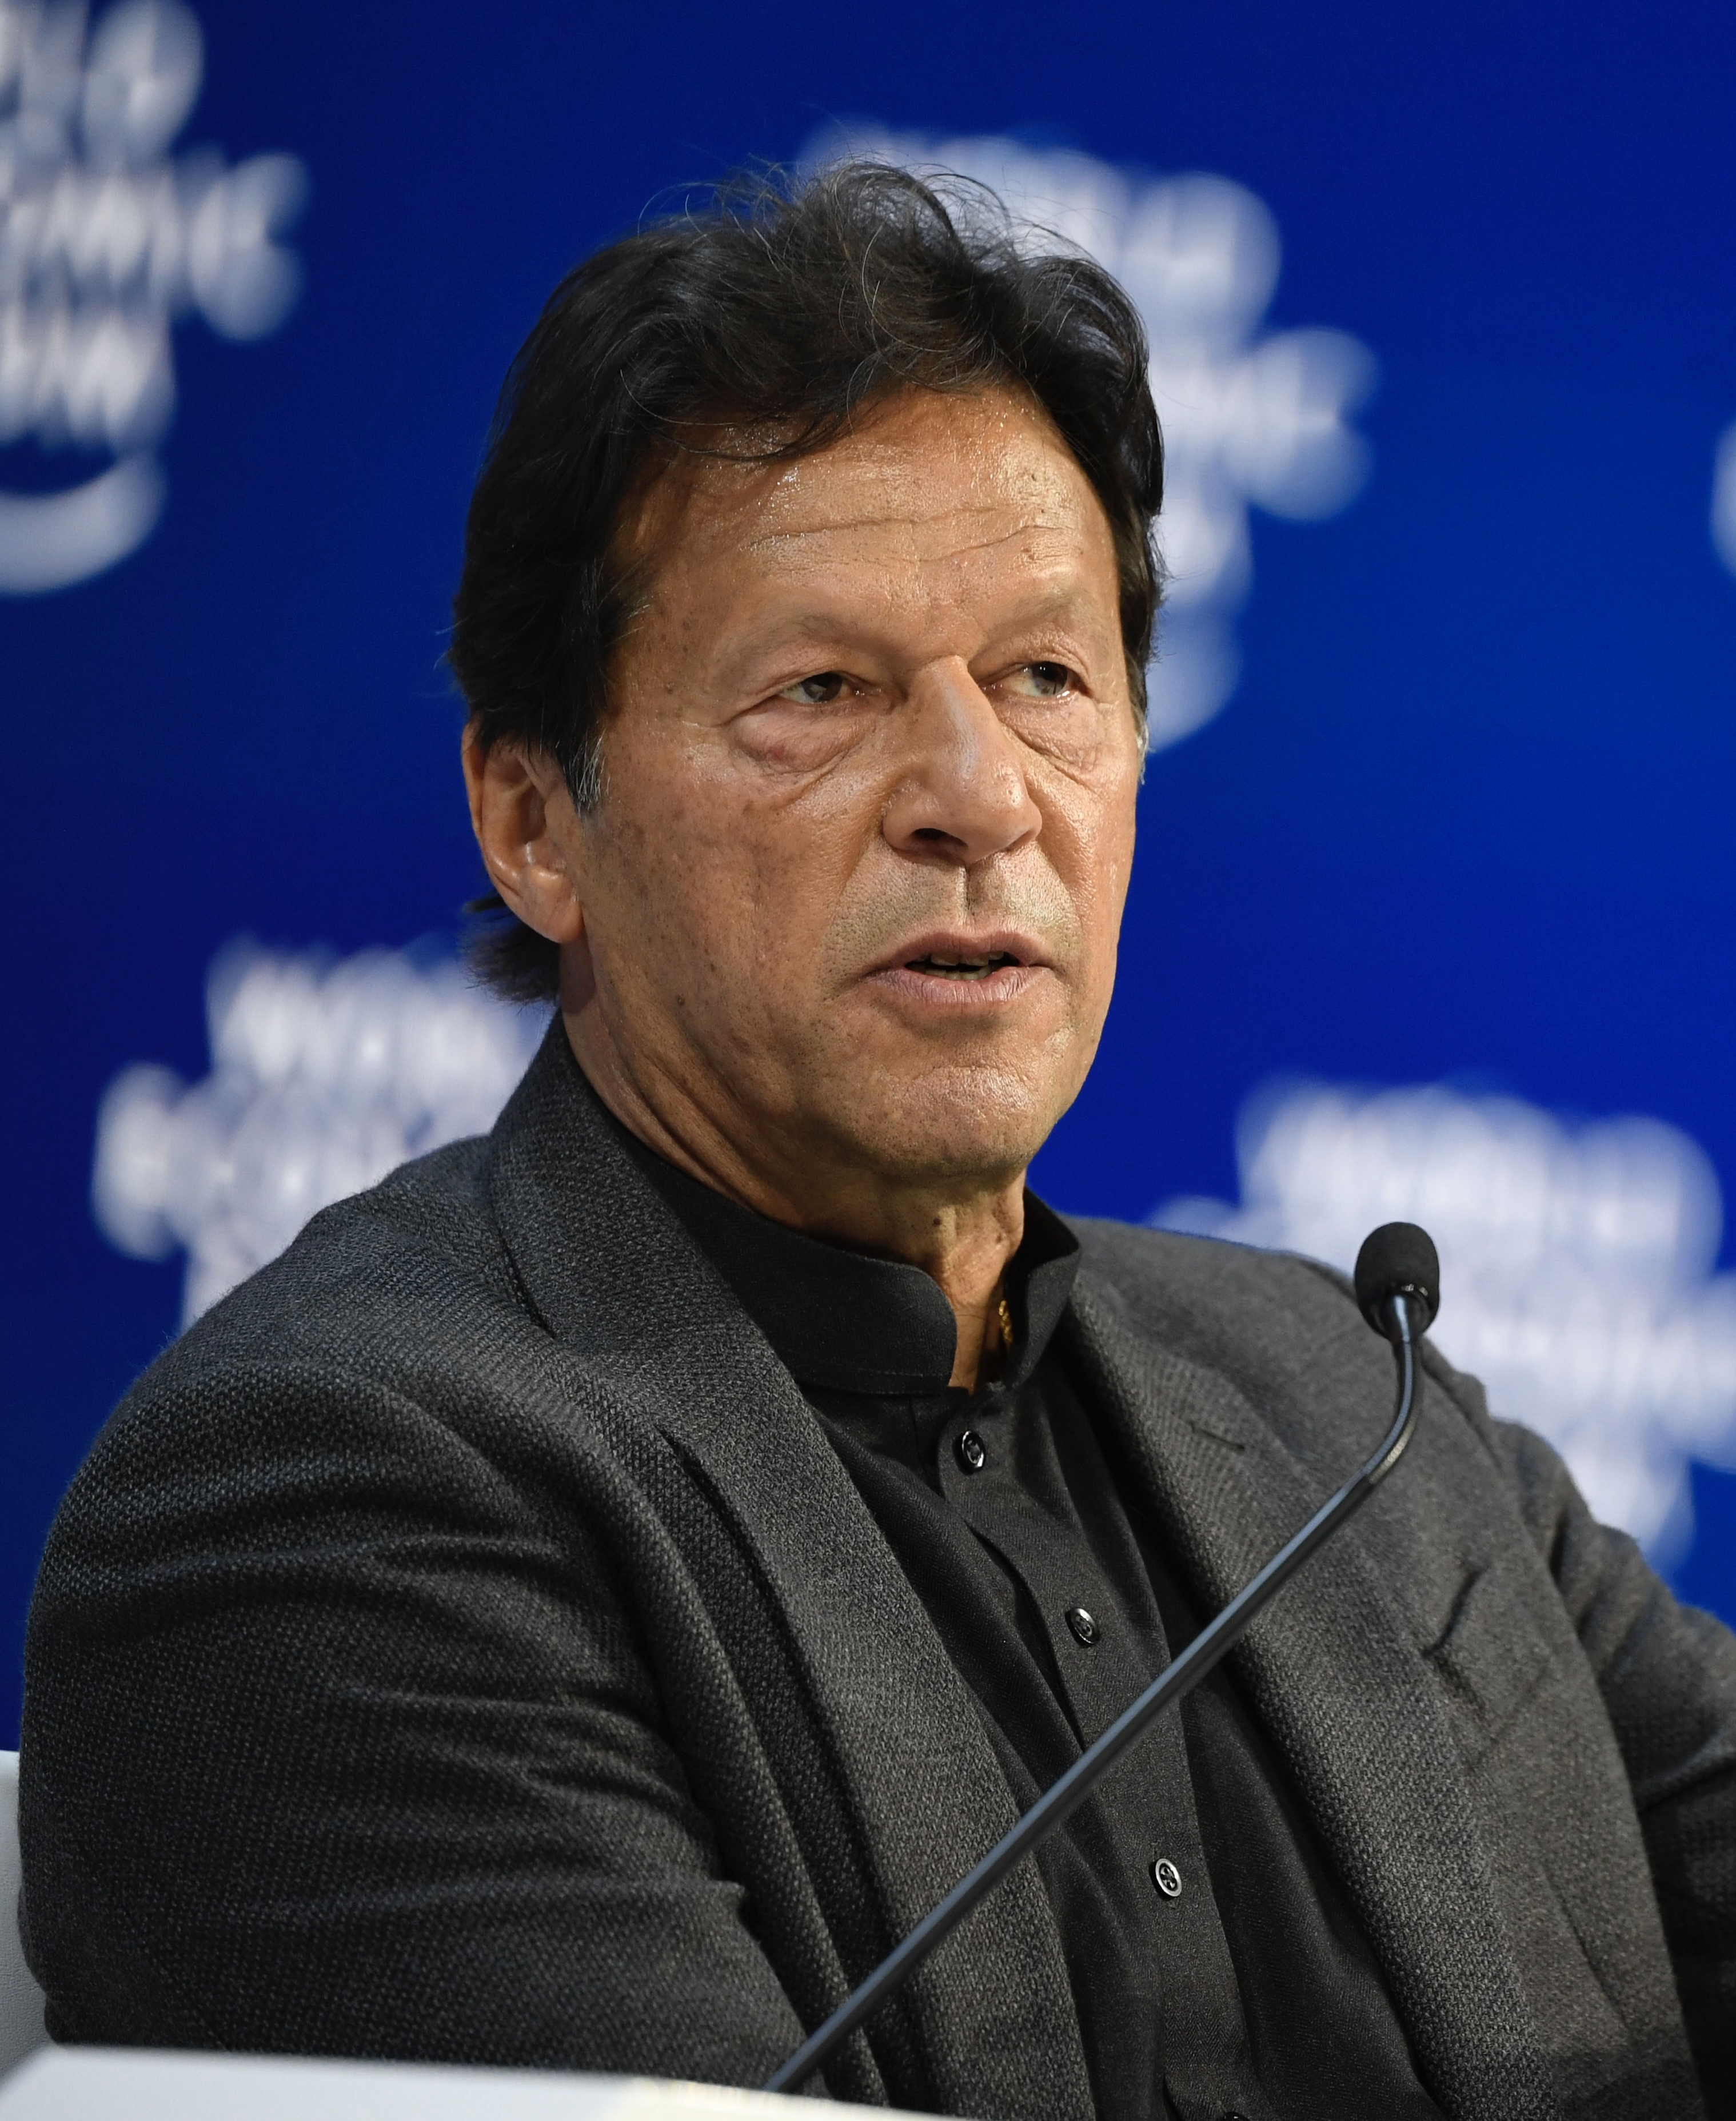 Khan at the [[World Economic Forum|WEF]] in 2020